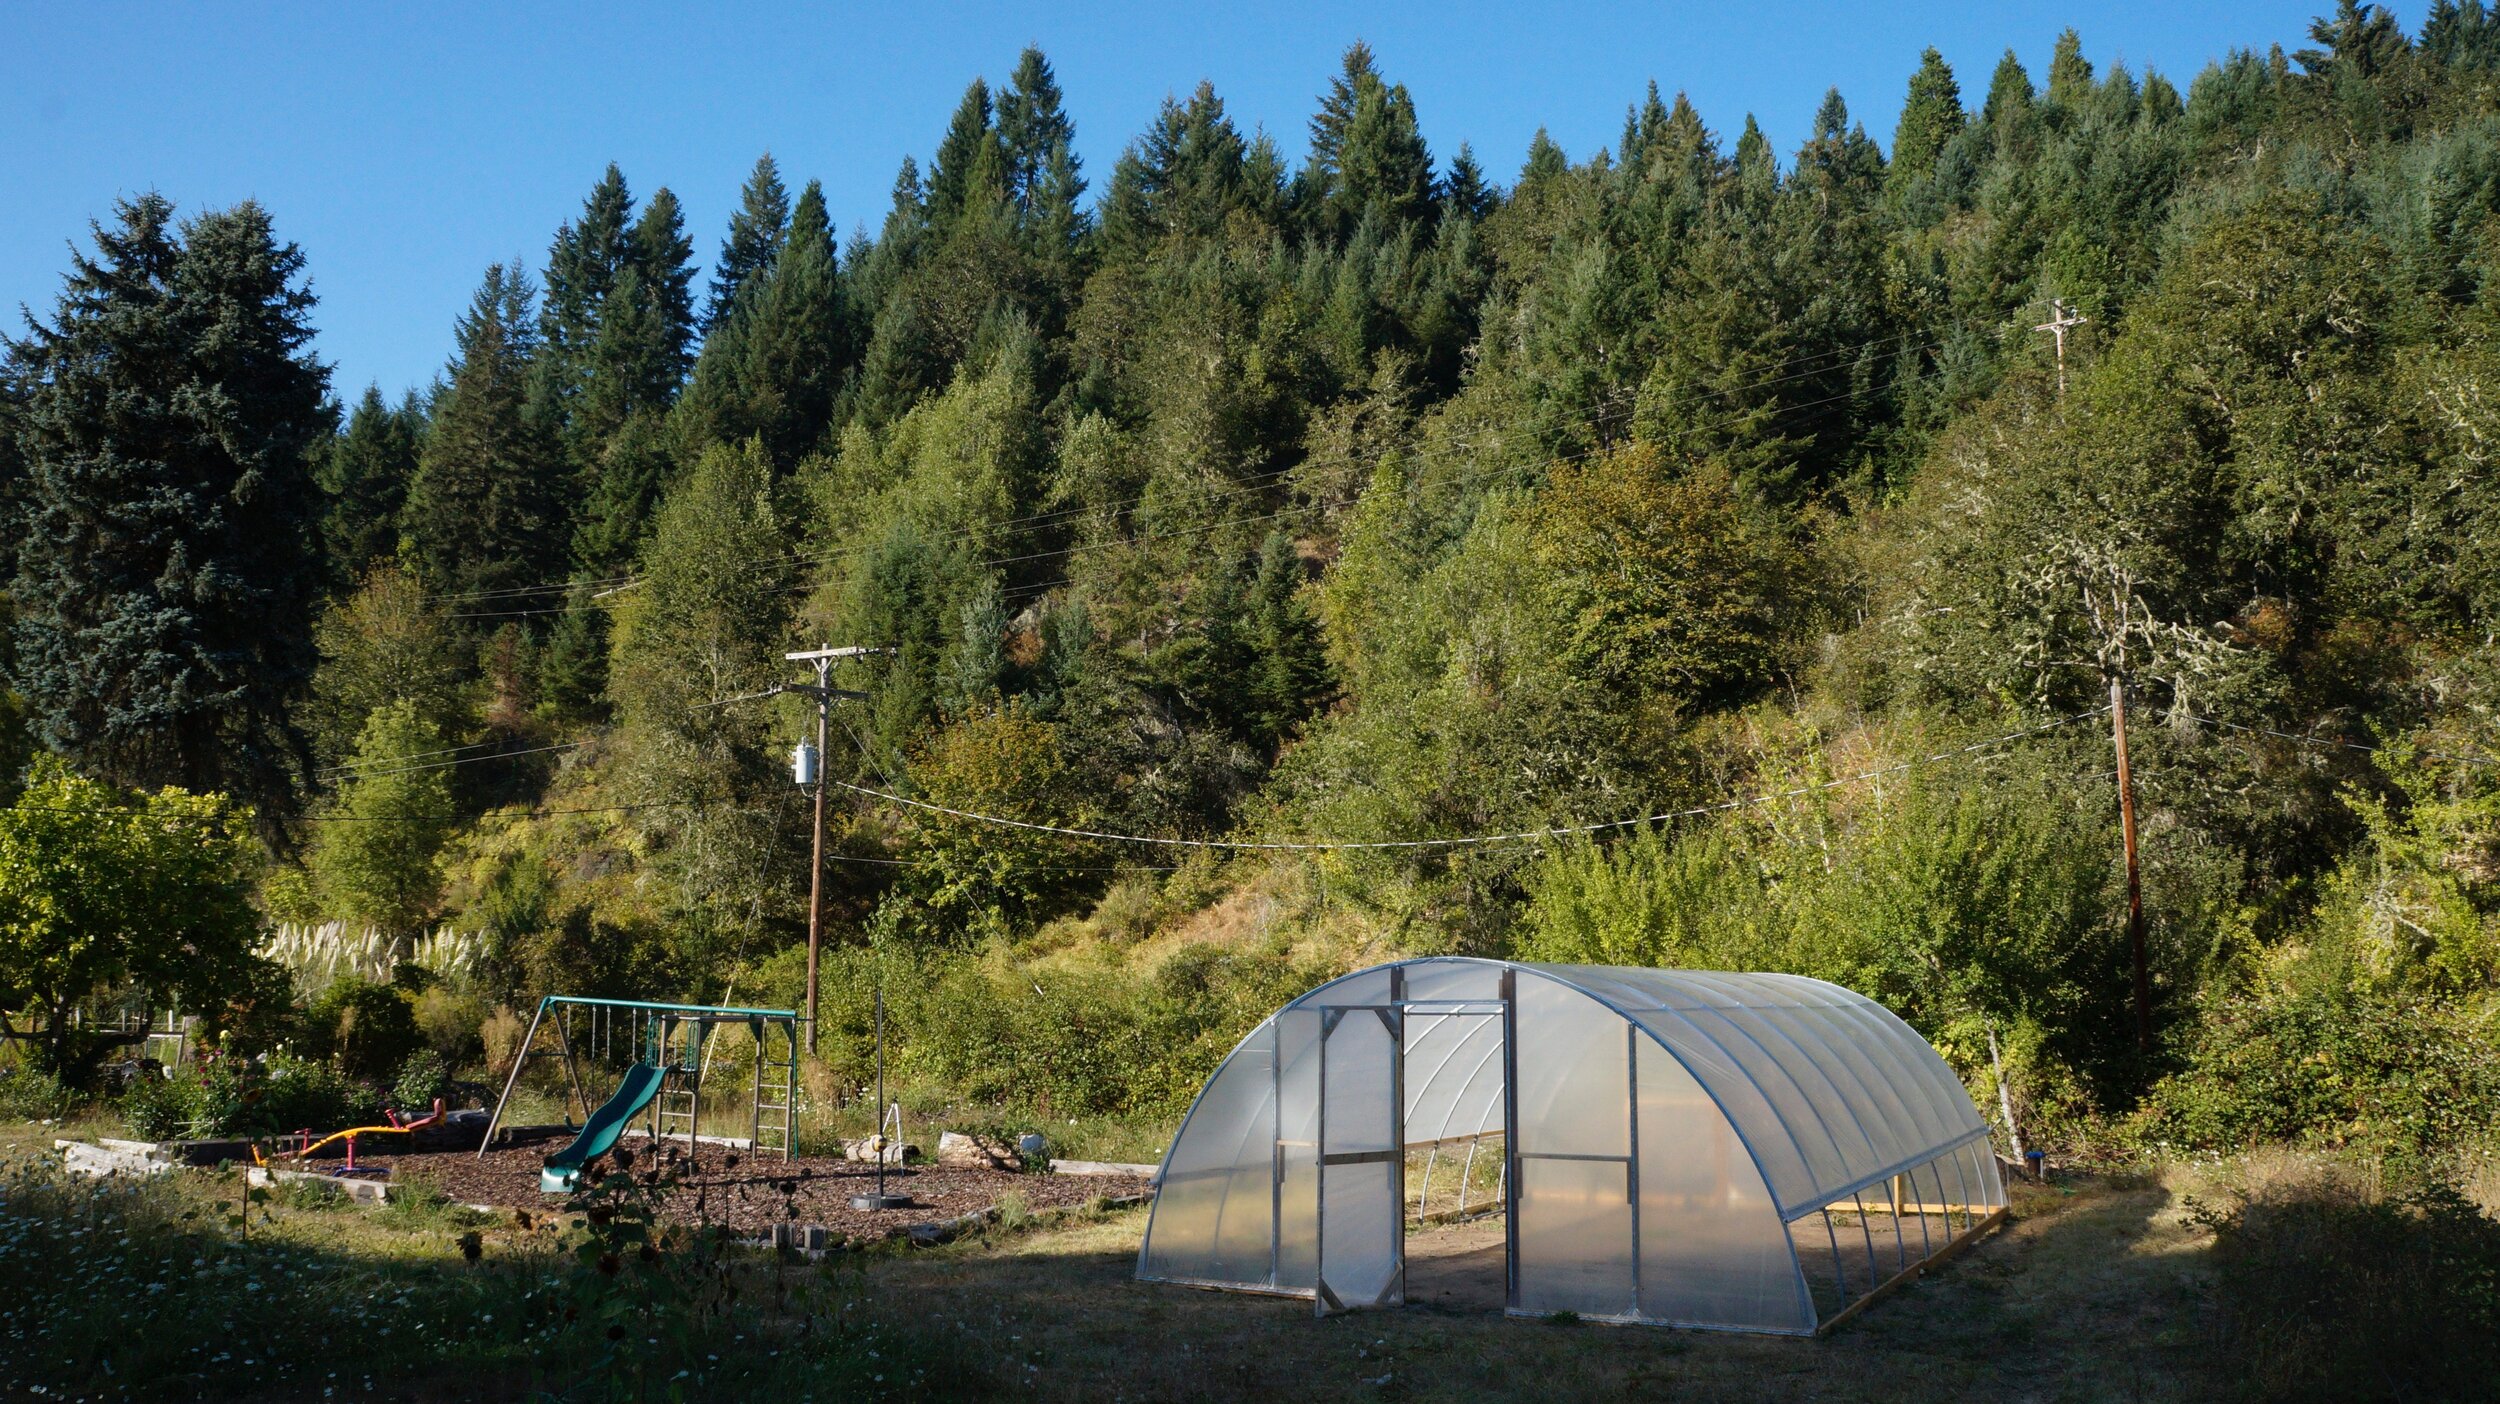 Greenhouse: 20 Foot Kit  Large Greenhouse for Sale — Oregon Greenhouse